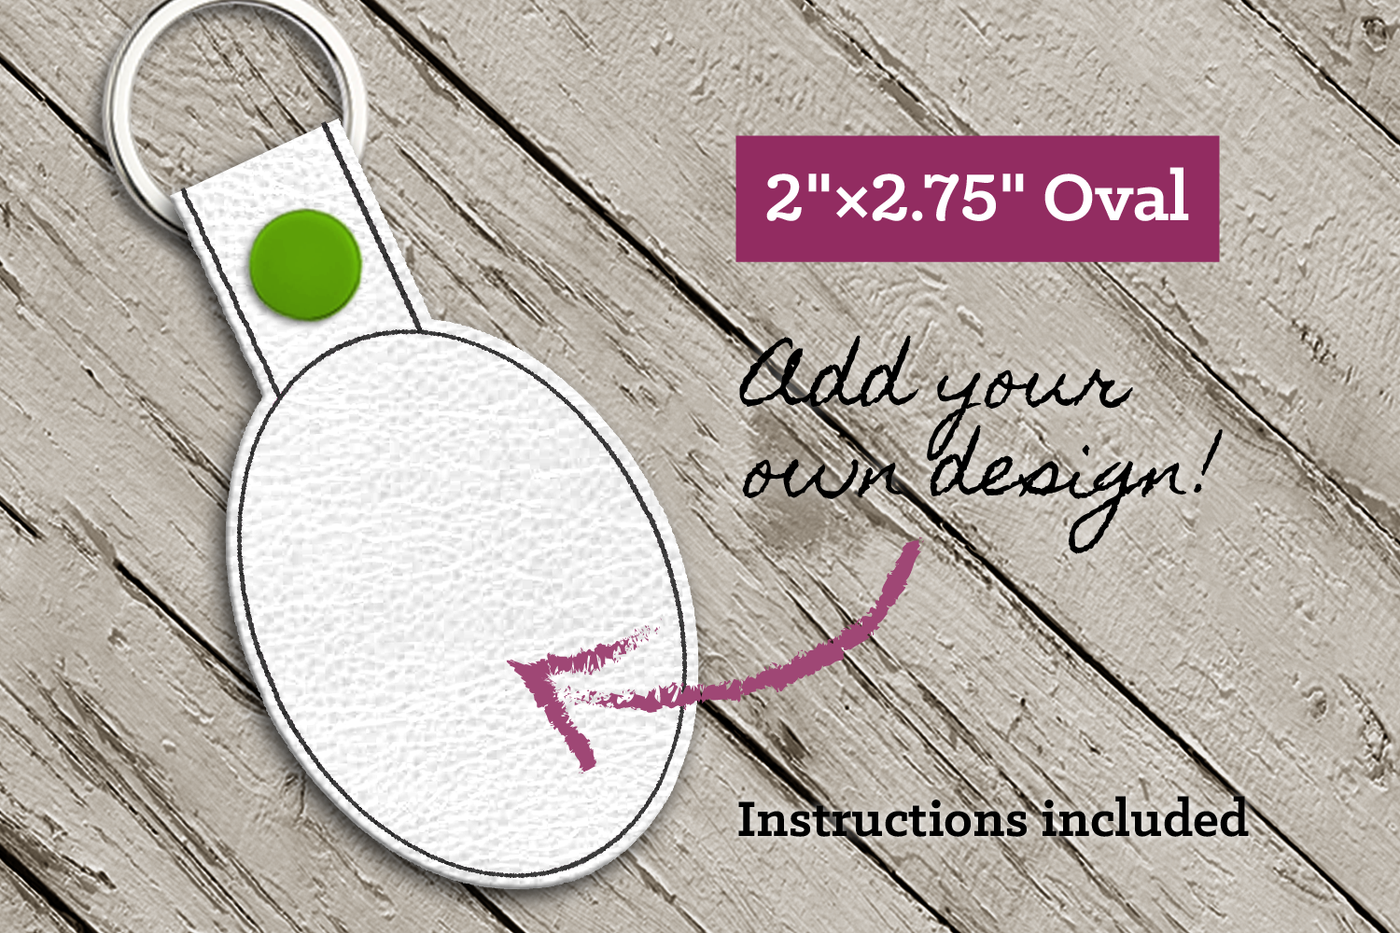 Blank oval key fob ITH design. Oval is 2 x 2.75 inches and instructions are included. Add your own design to the oval.